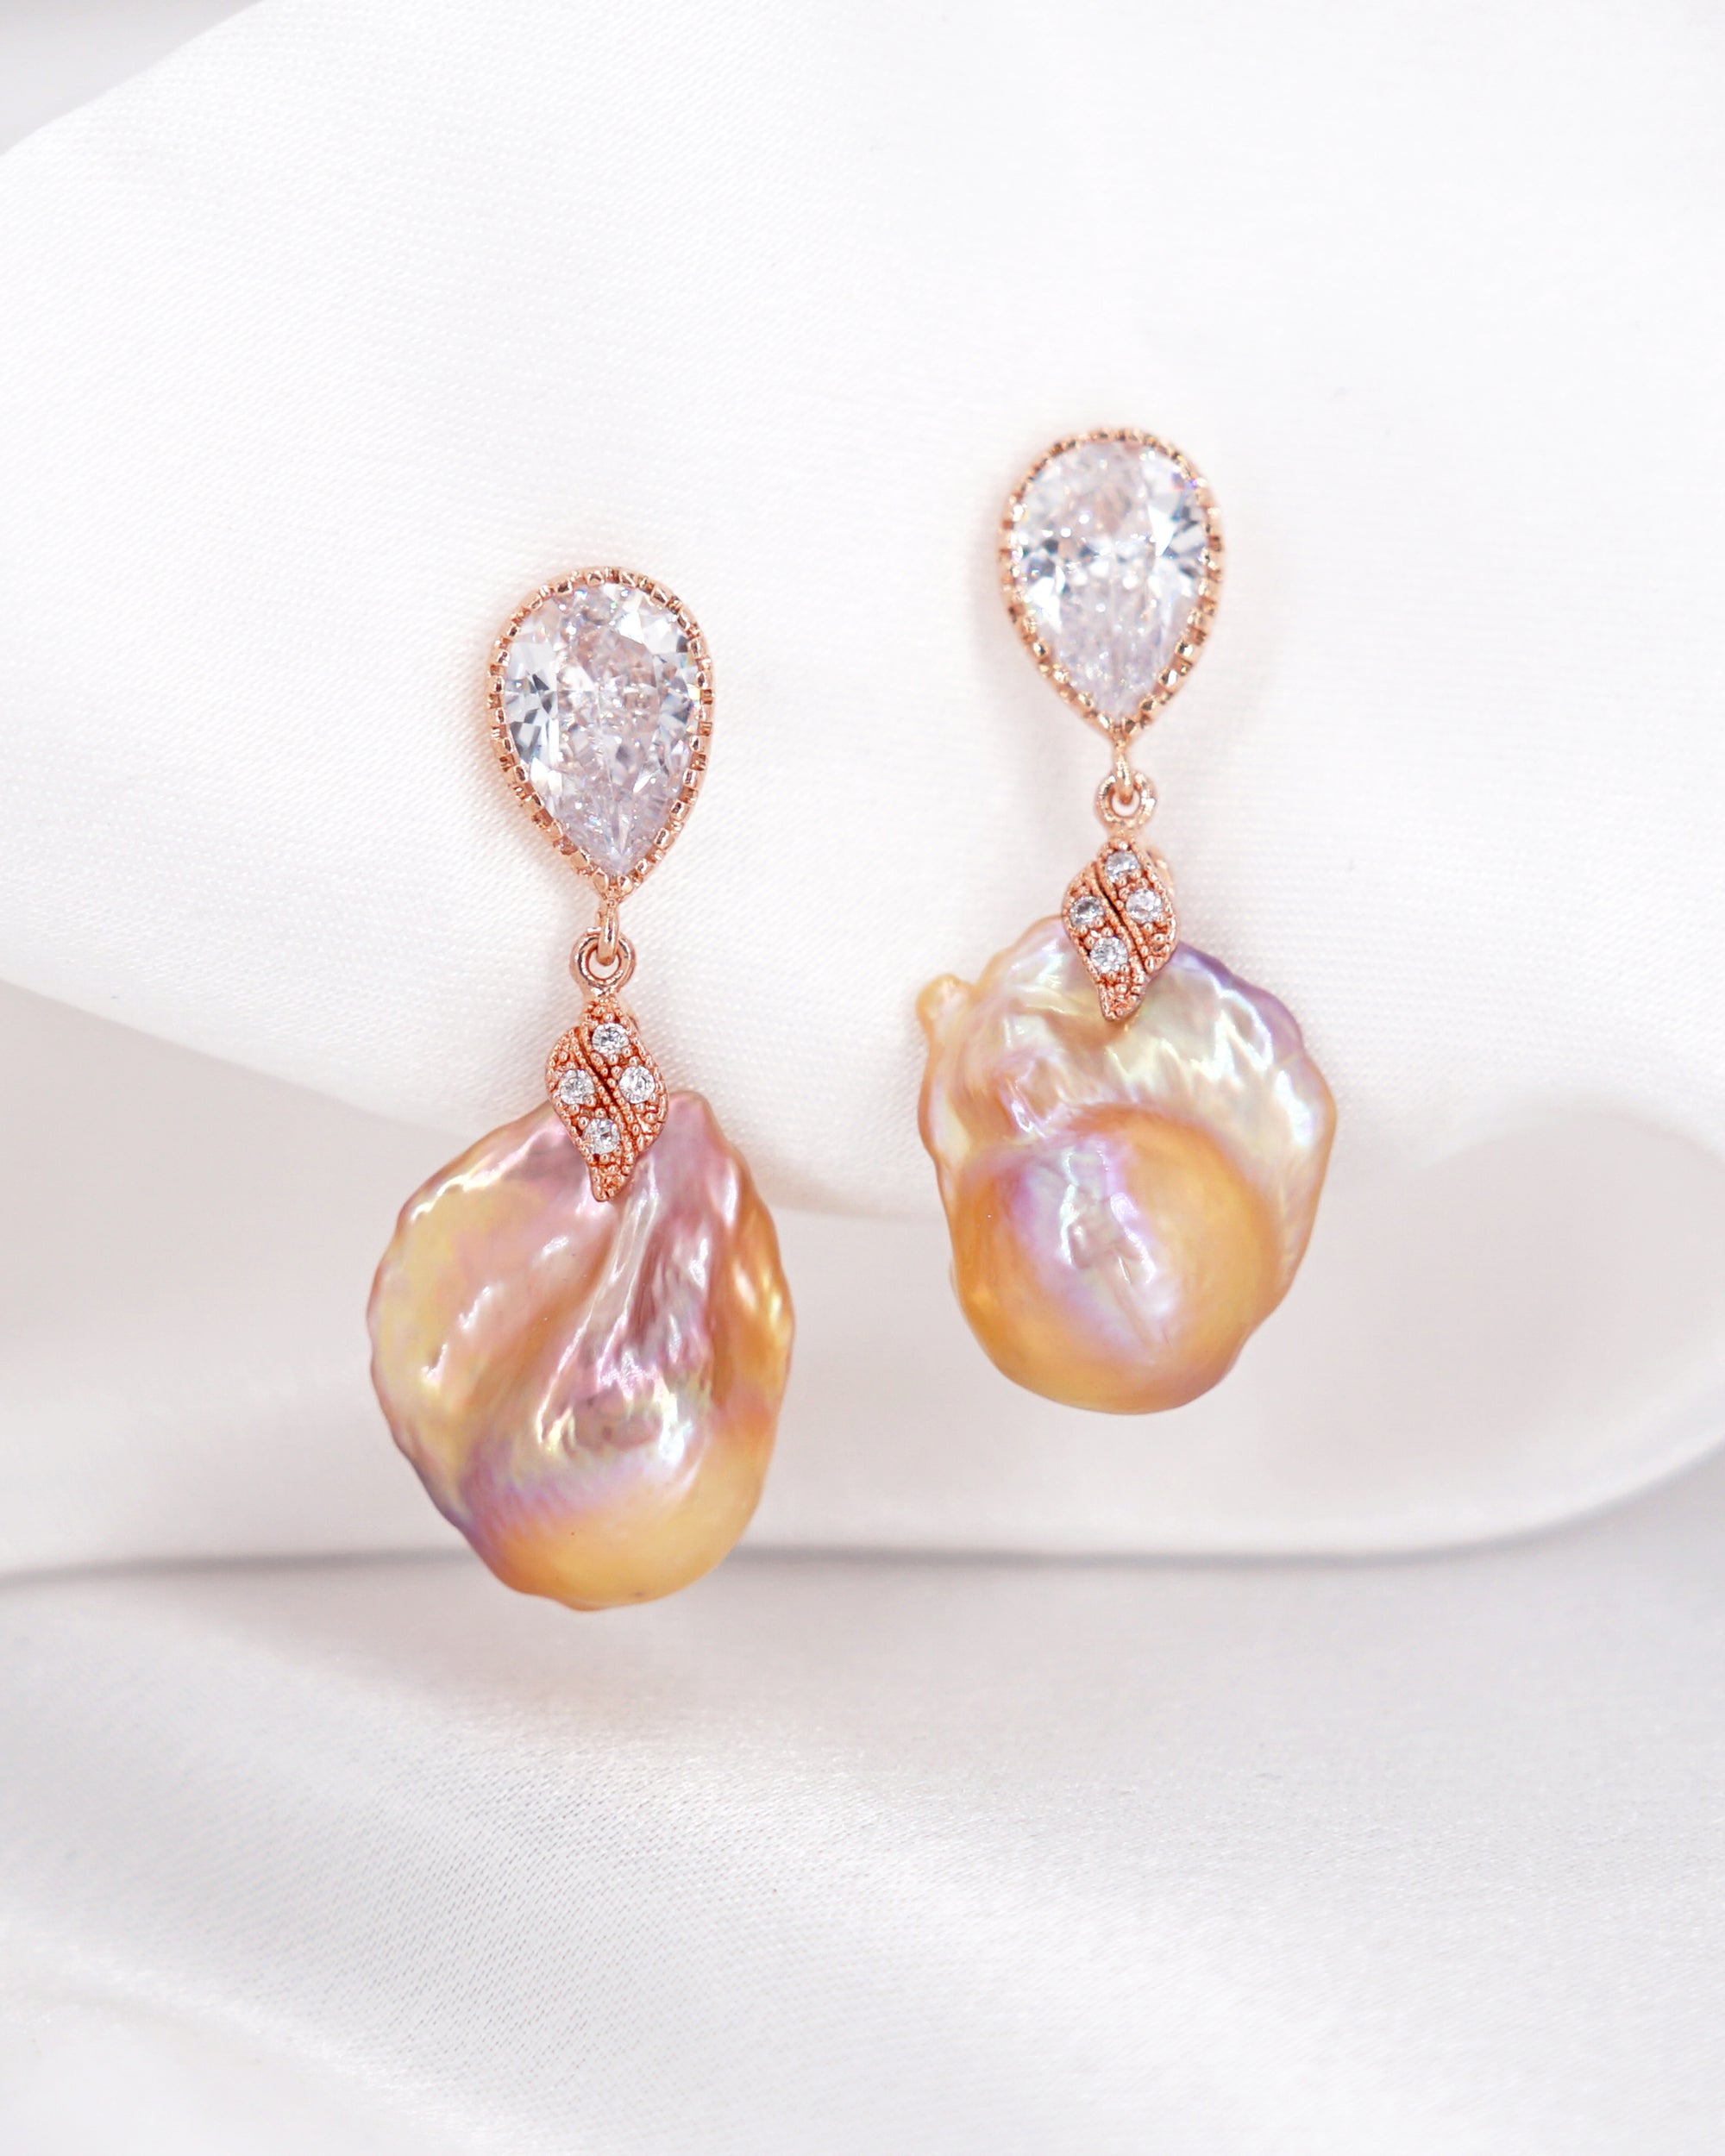 Statement Baroque Pearl Earrings - Purple Golden Flameball - Wedding Bridal Jewelry for Brides and Bridesmaids | Singapore